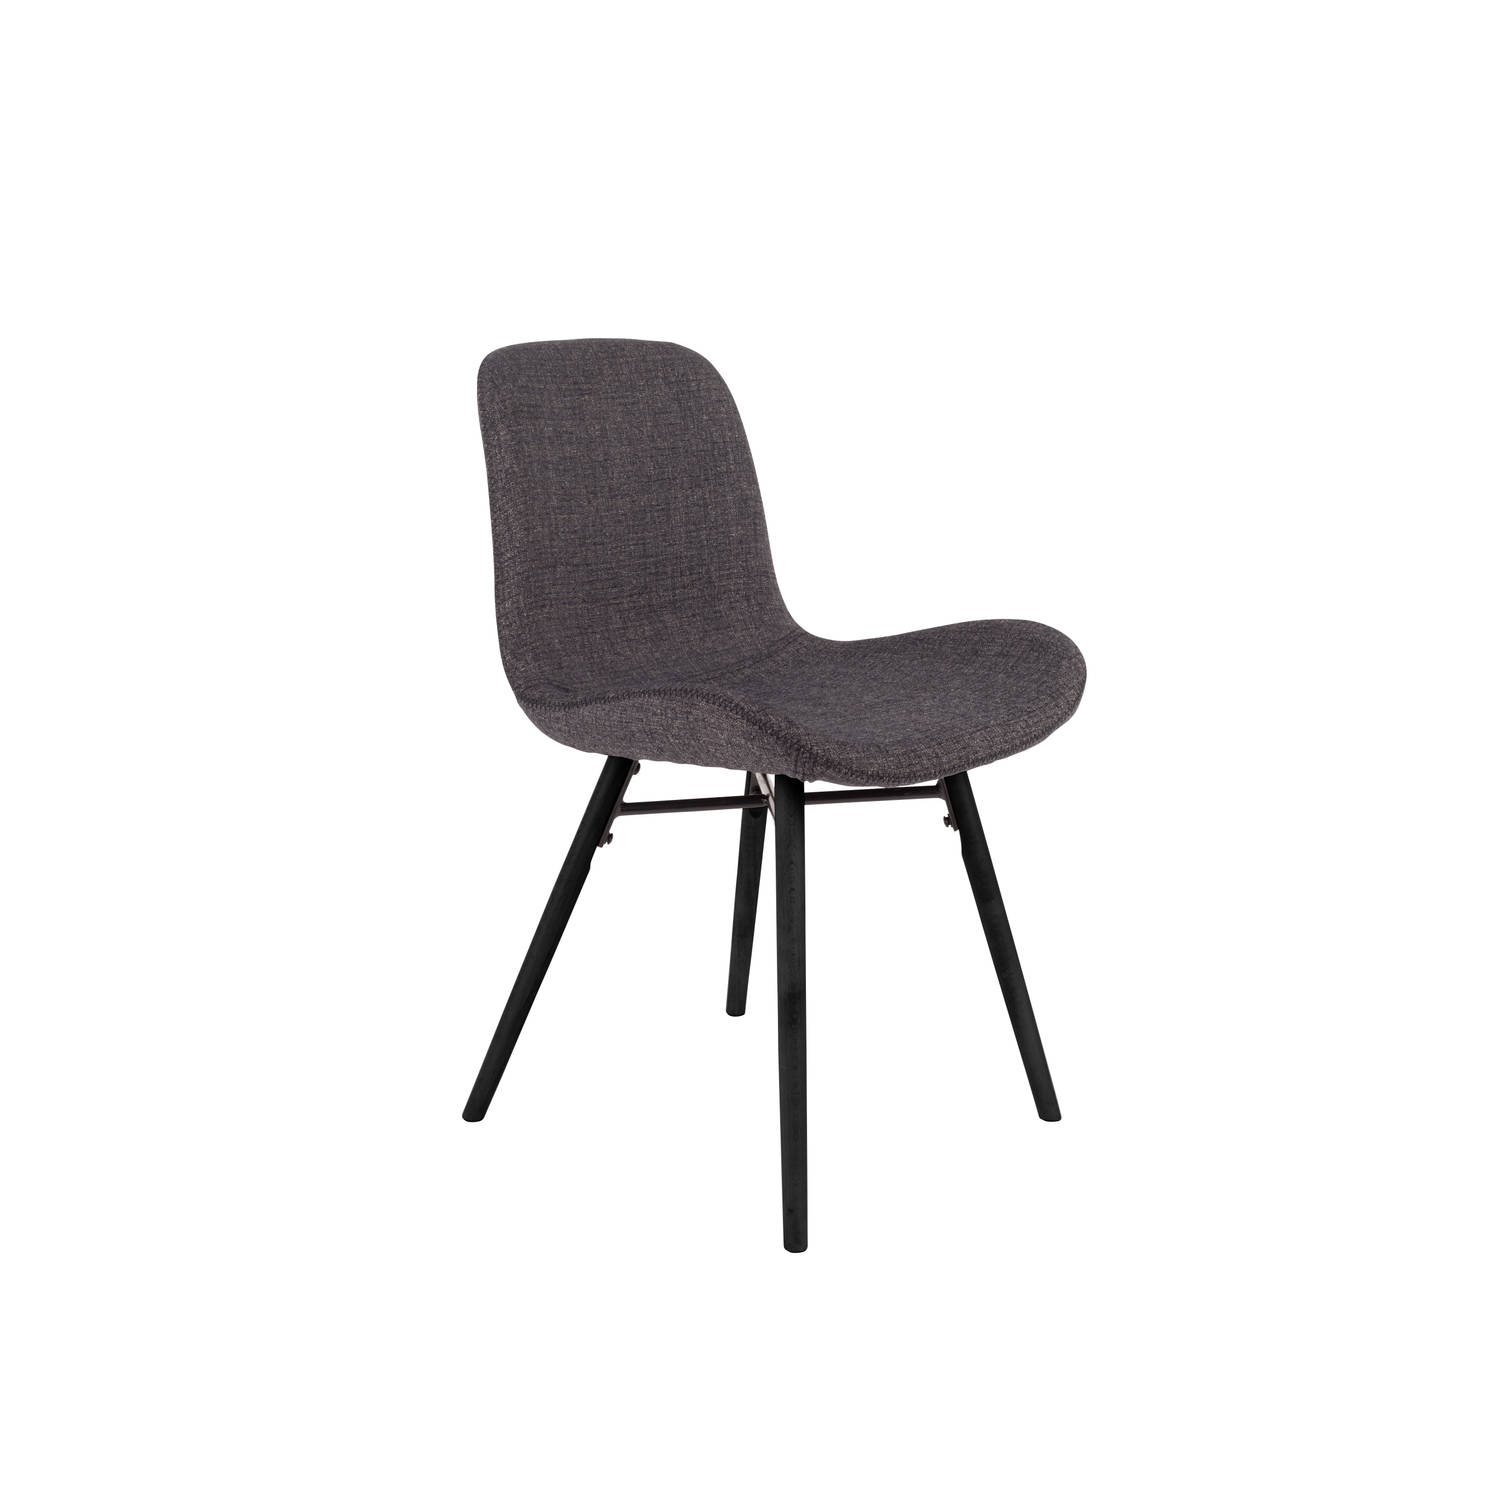 ANLI STYLE CHAIR LESTER ANTHRACITE